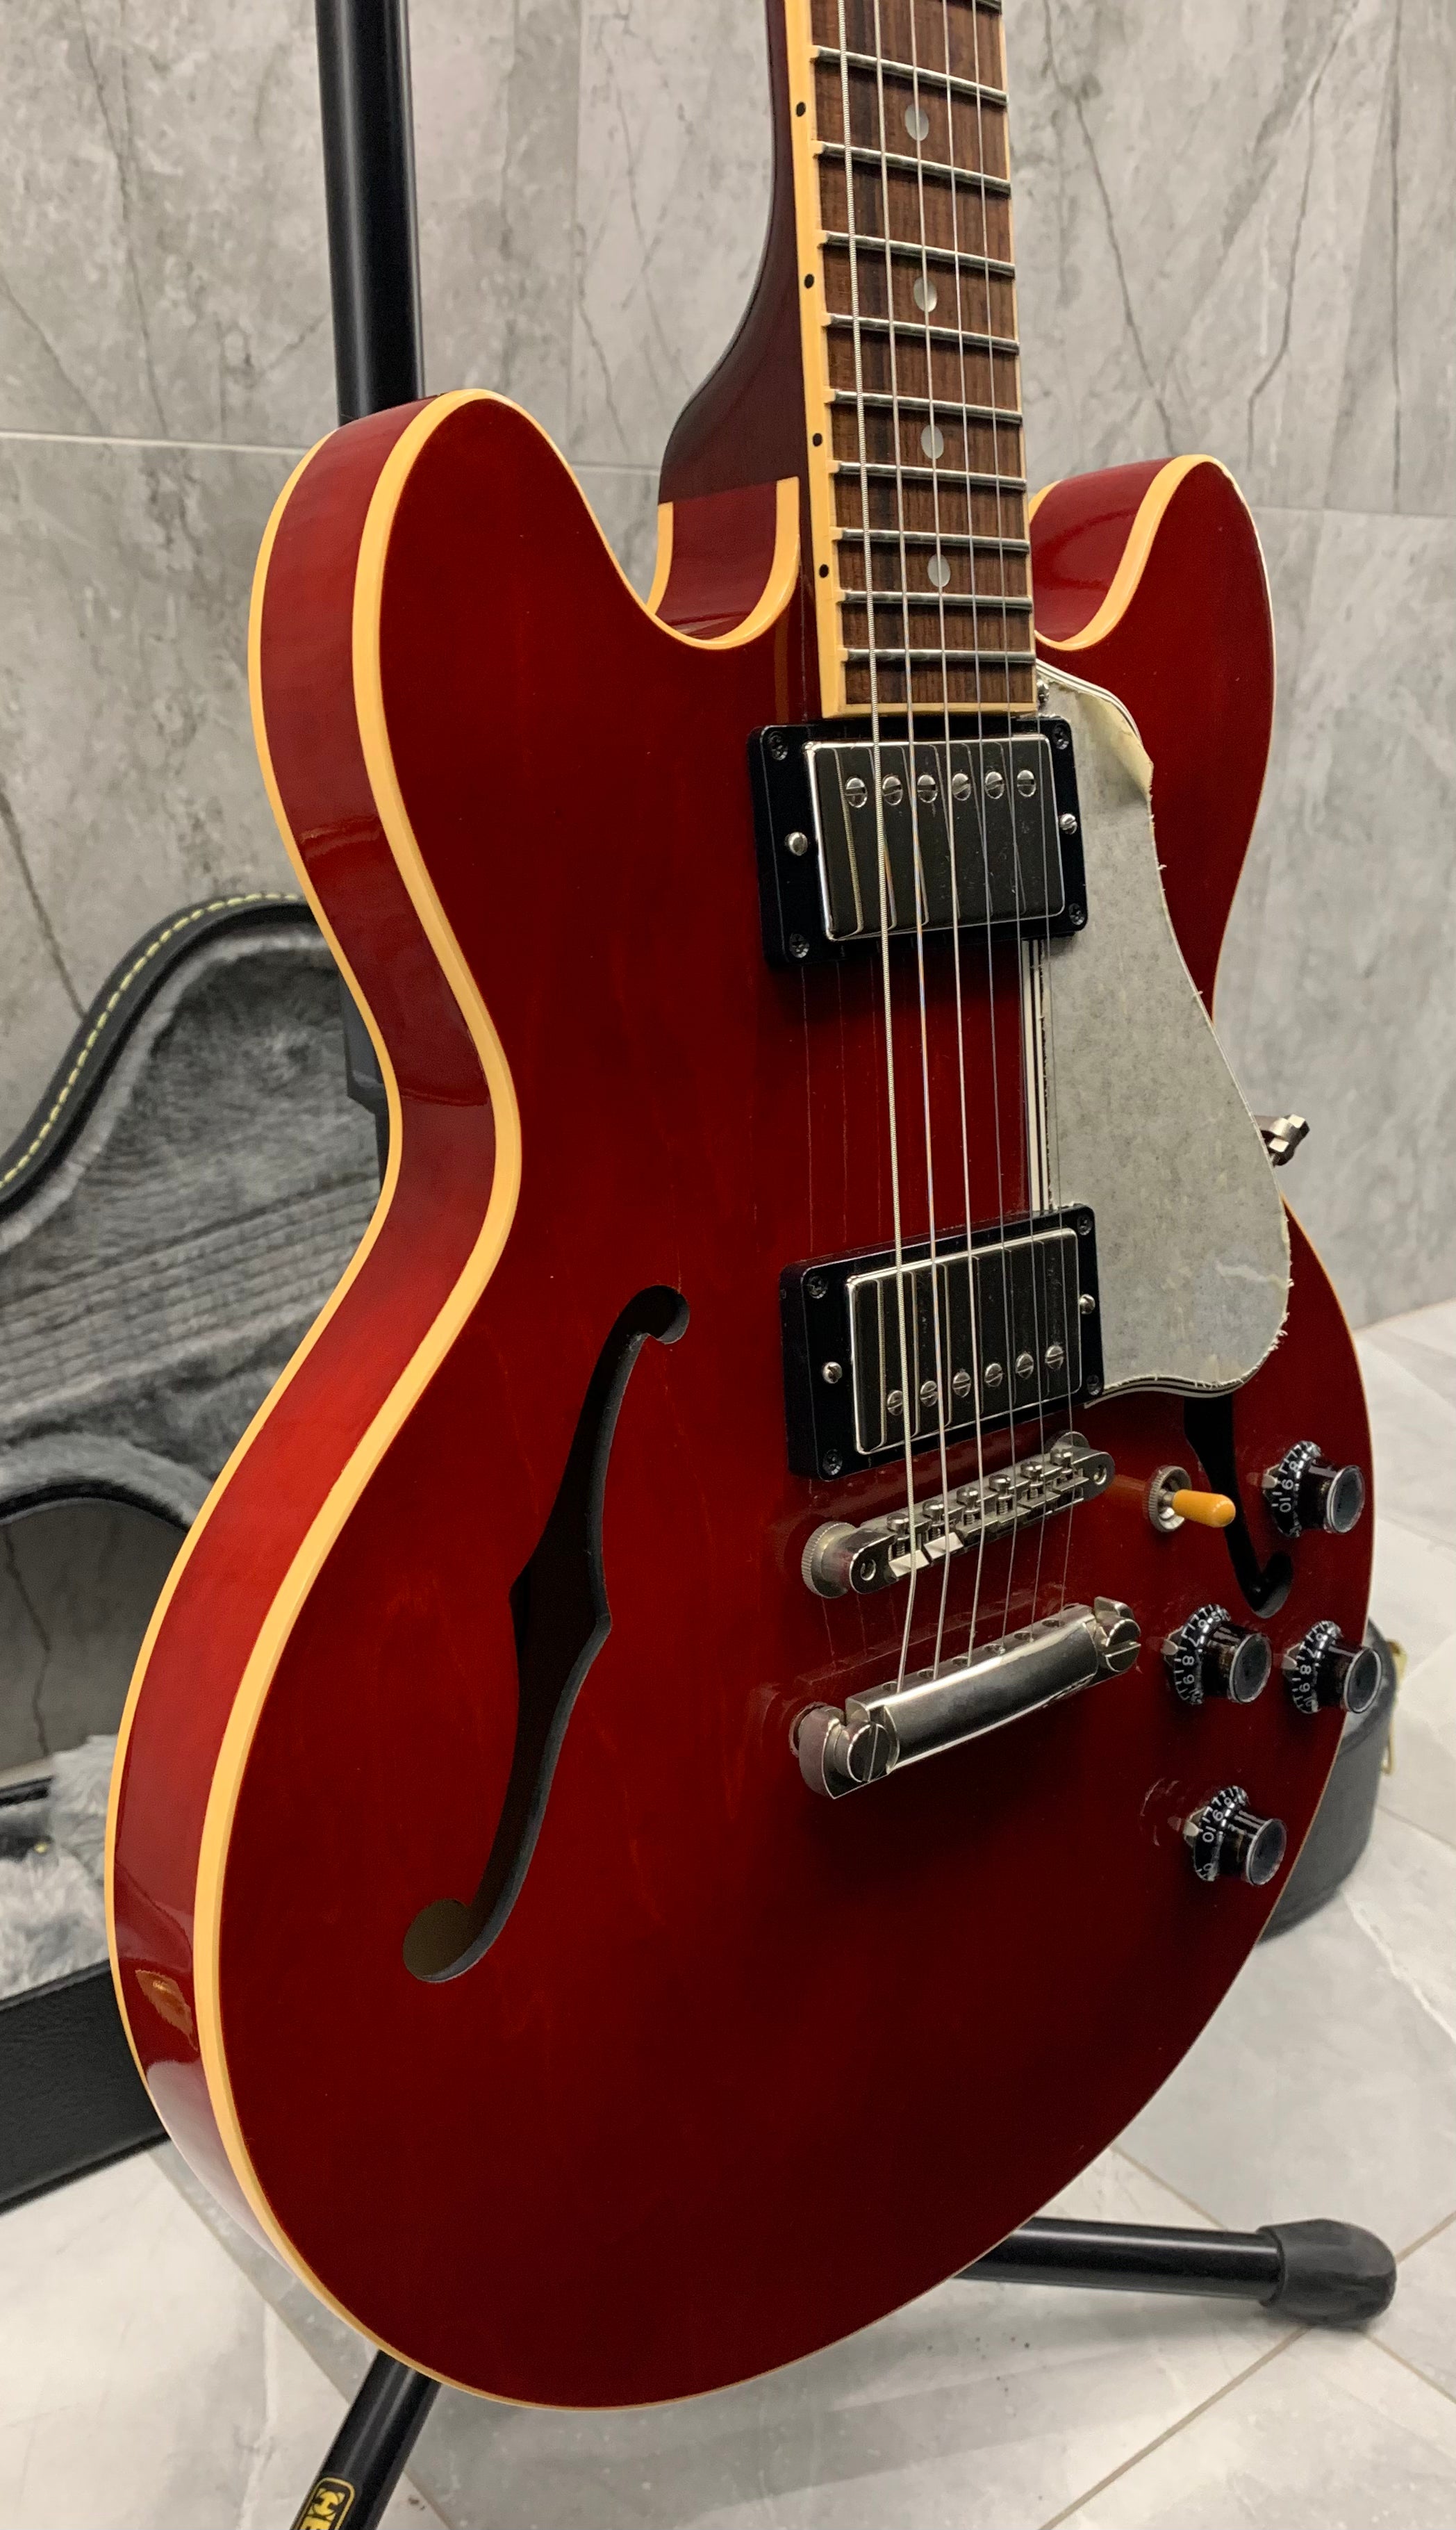 GIBSON ES 339 CHERRY GLOSS FINISH - USED 2008 - SEE PICTURES FOR